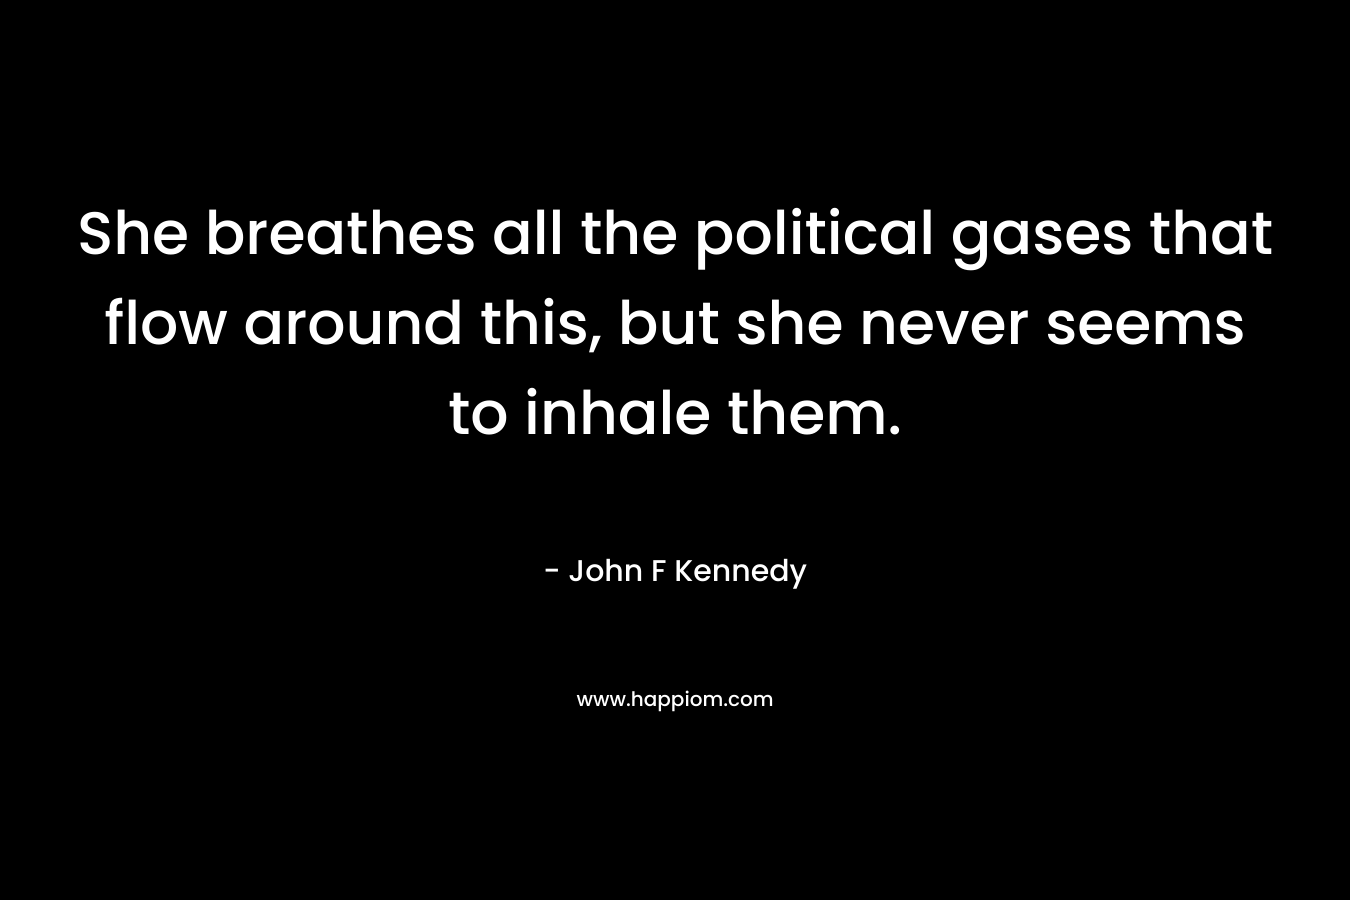 She breathes all the political gases that flow around this, but she never seems to inhale them. – John F Kennedy